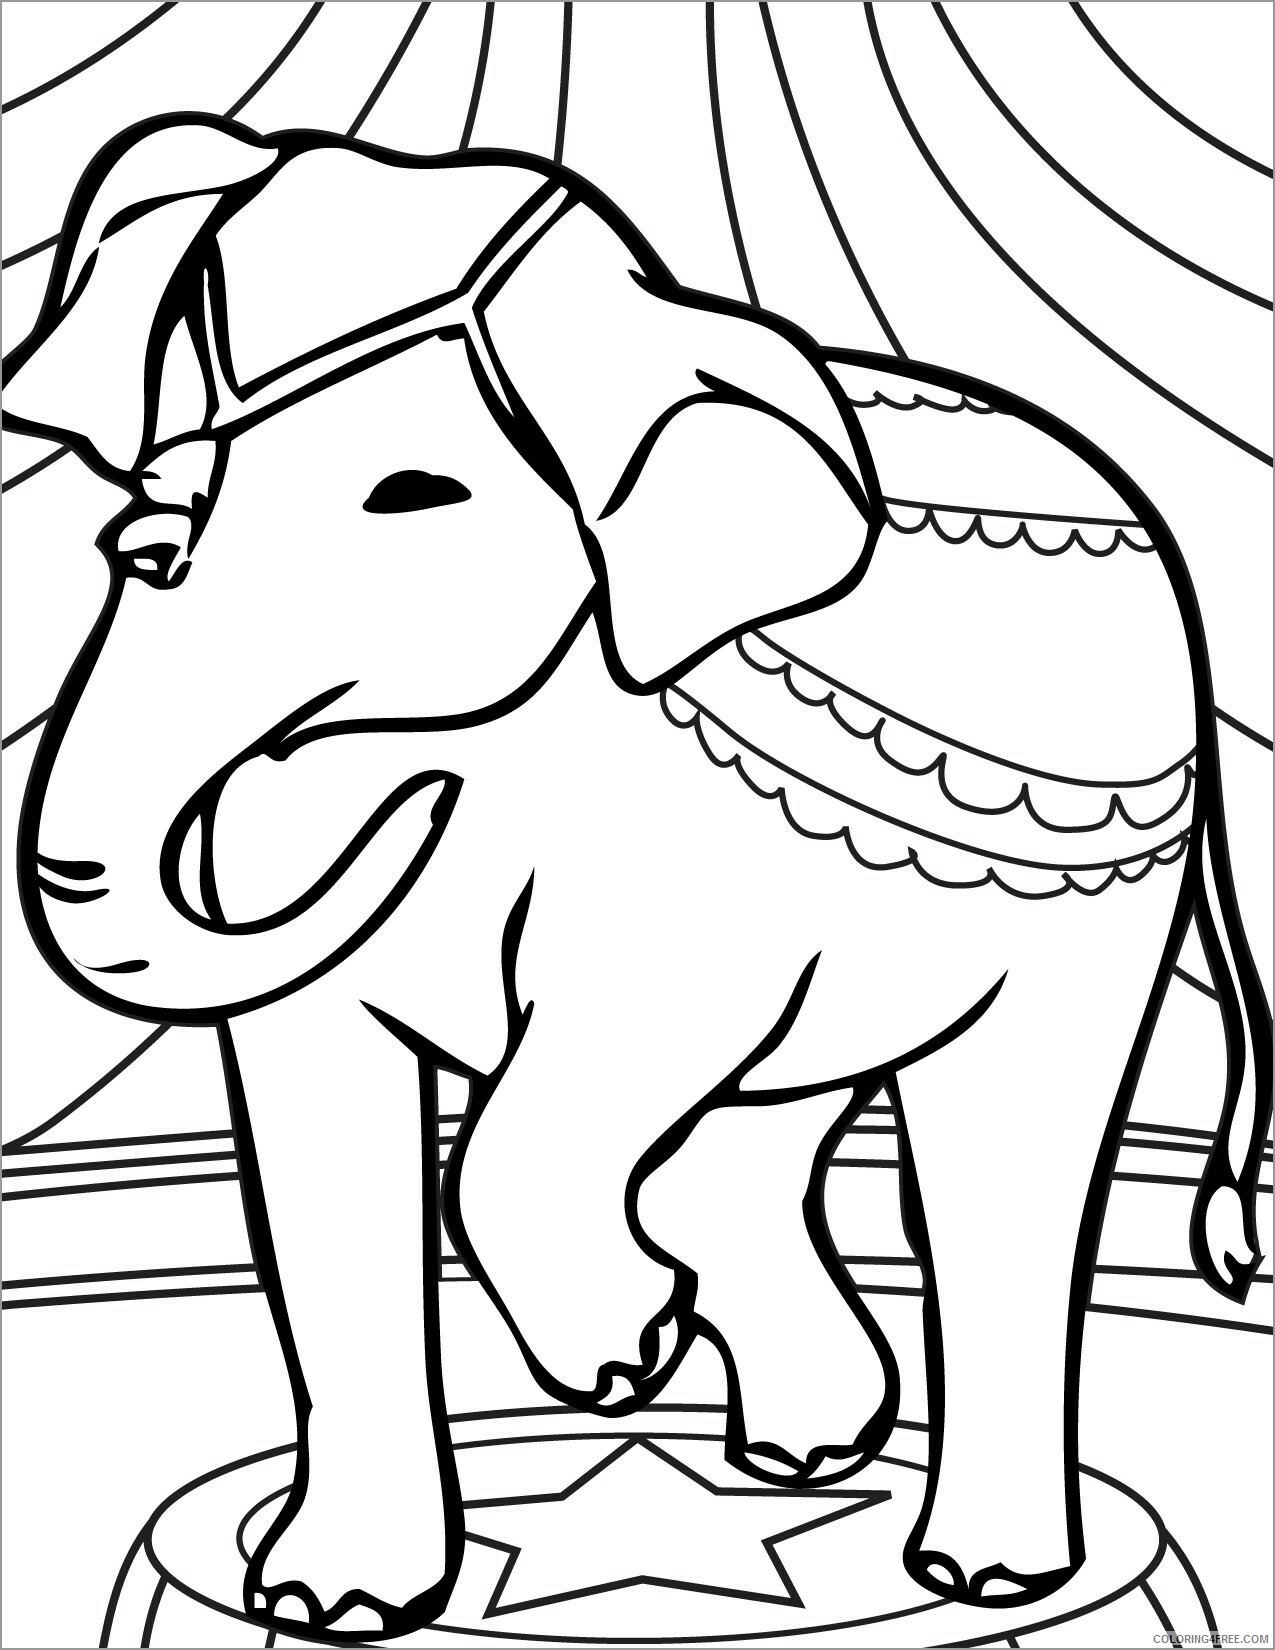 Circus Coloring Pages elephant circus animal Printable 2021 1605 Coloring4free